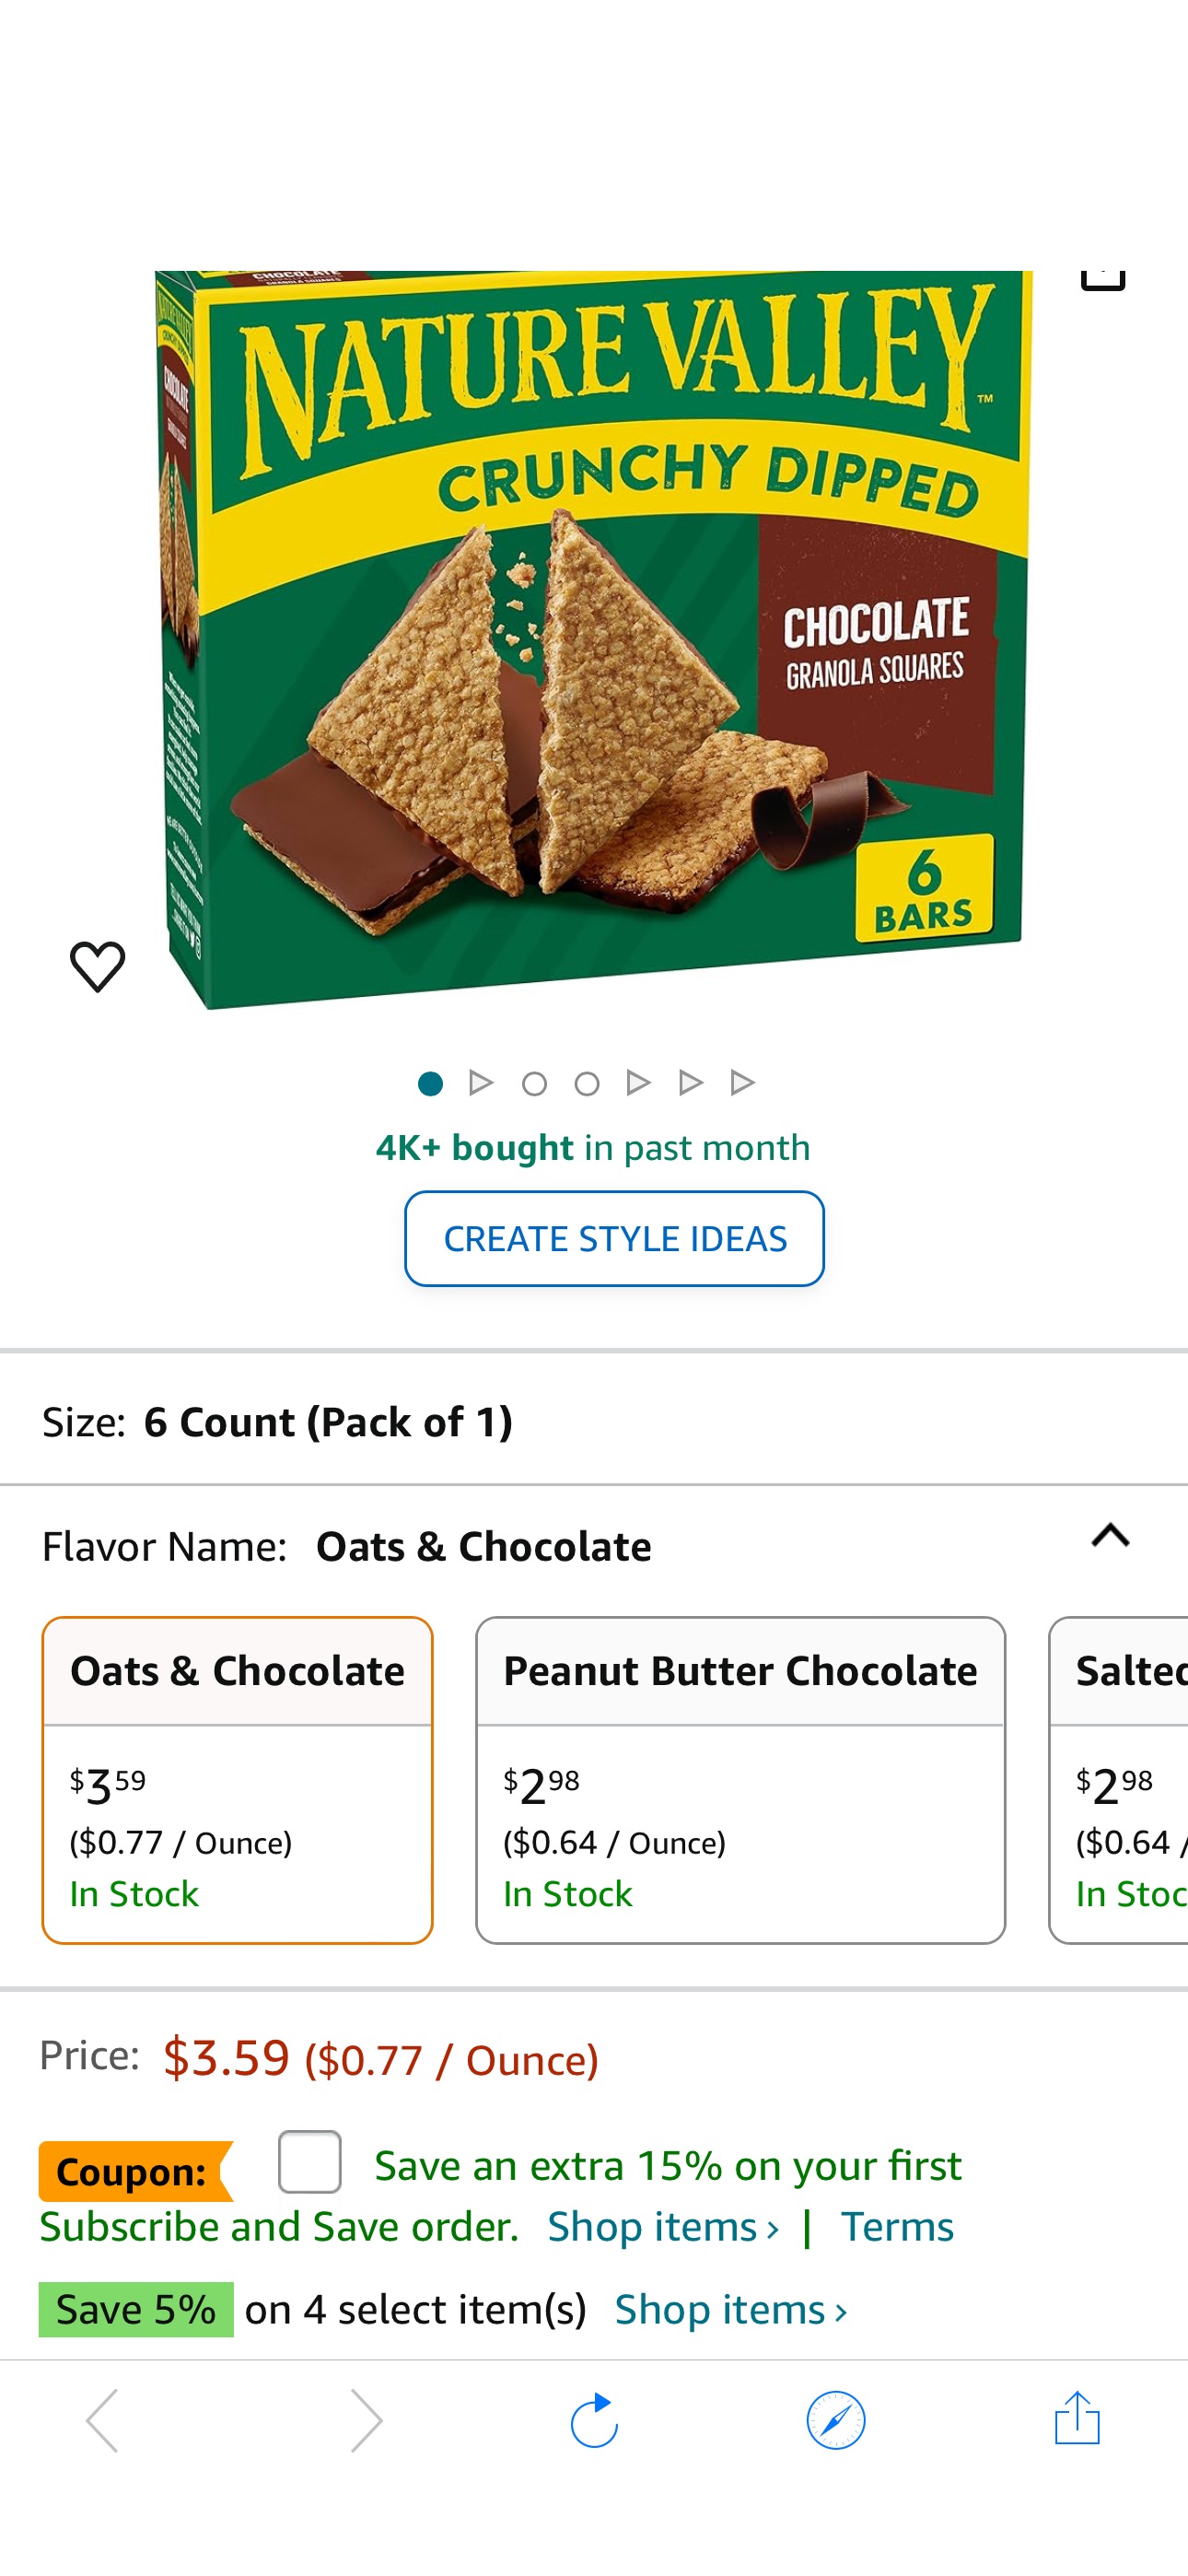 Amazon.com: Nature Valley Crunchy Dipped Granola Squares, Oats and Chocolate, 6 ct coupon